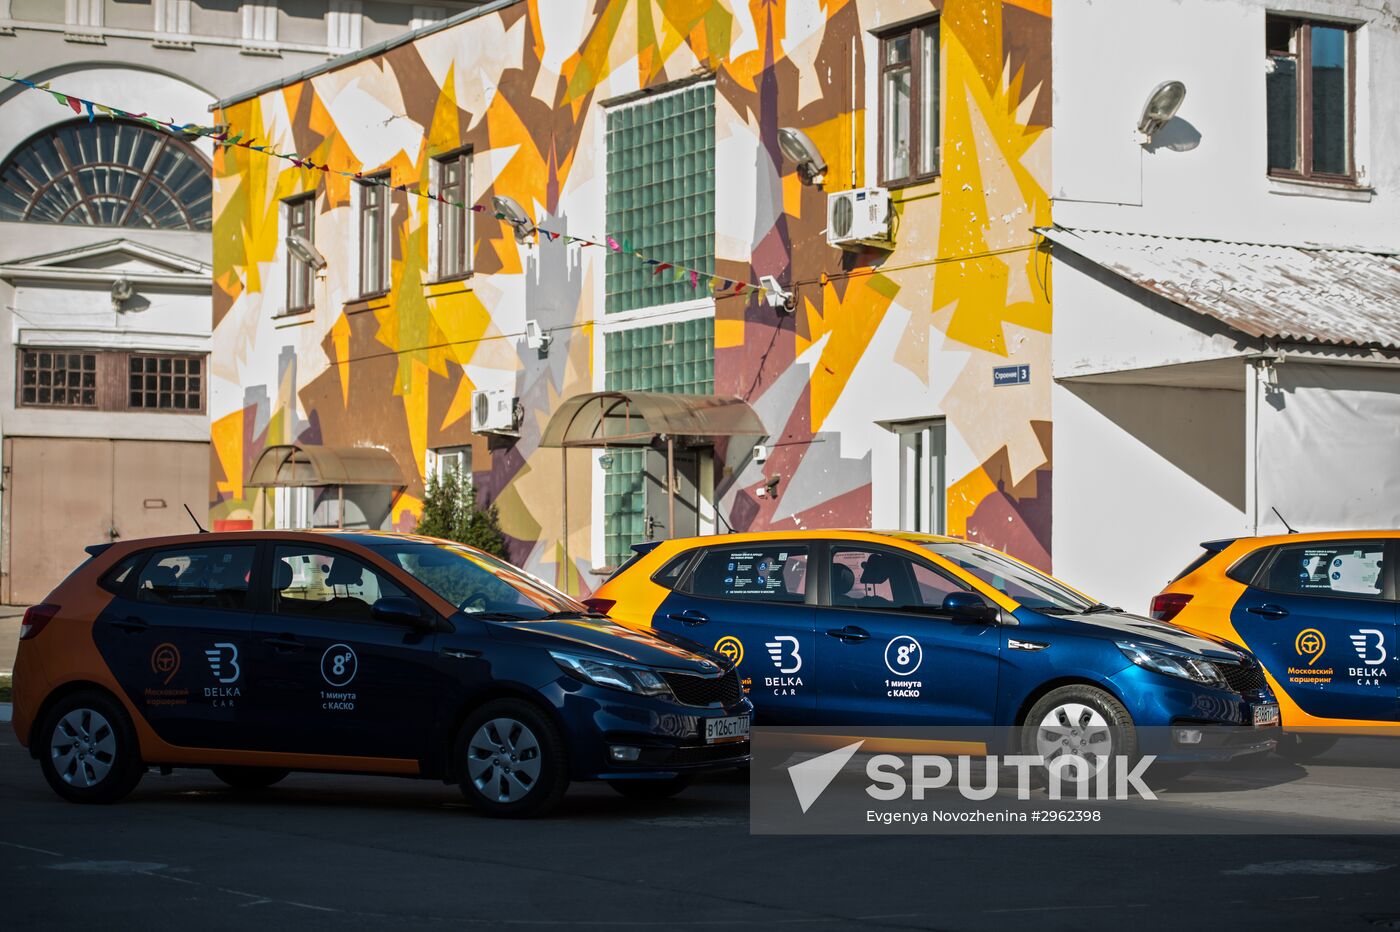 Belkacar carsharing network launched